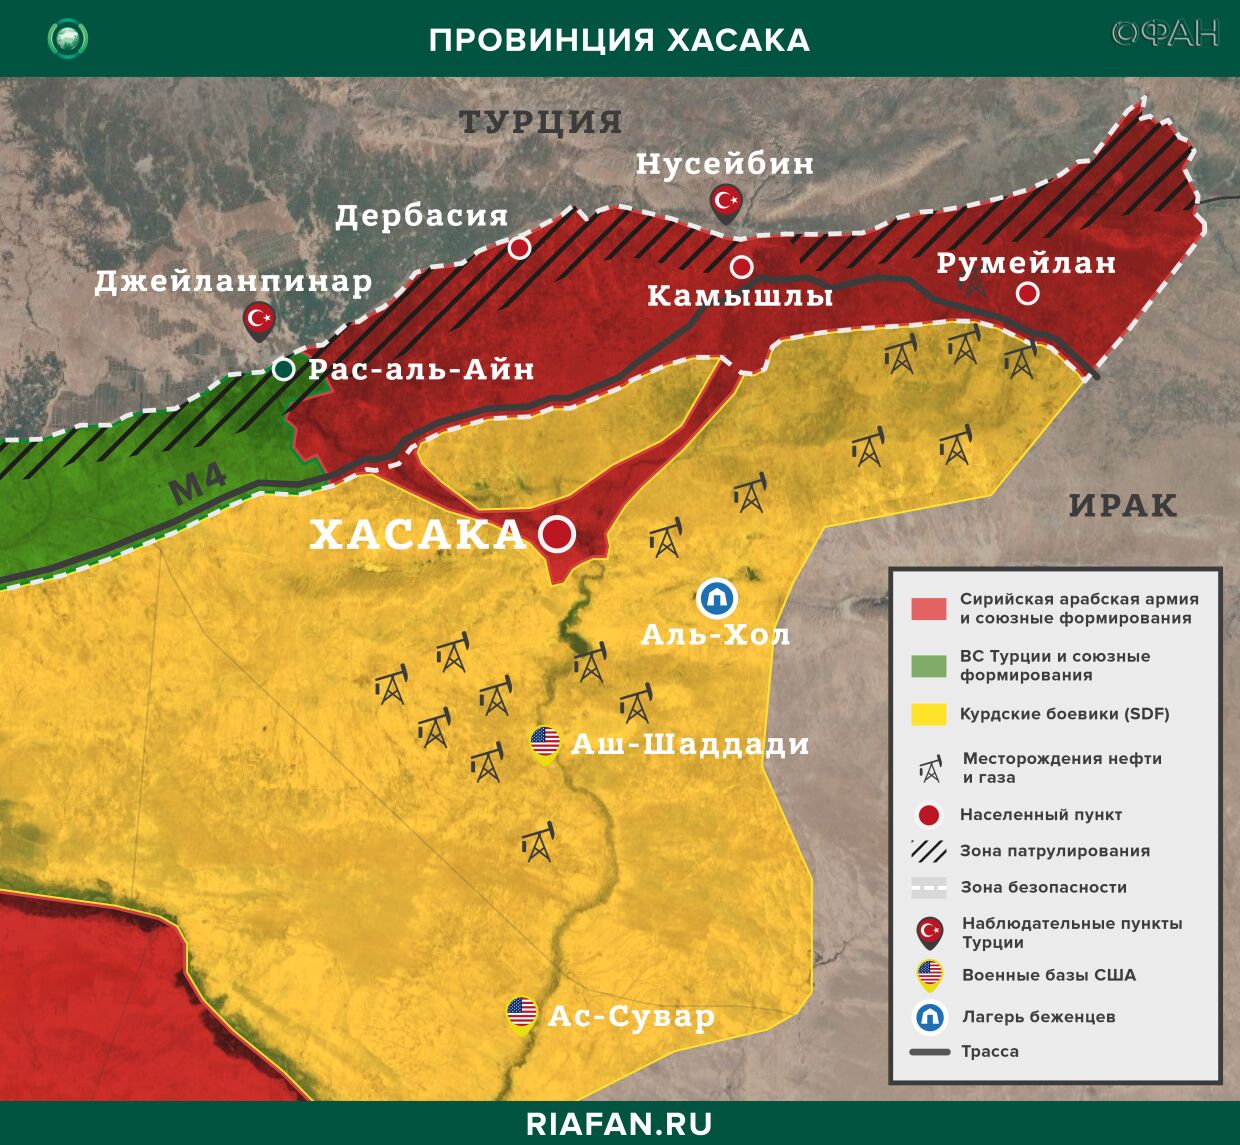 Syria news 5 September 16.30: an explosion at an ammunition depot took place in the city of Azaz